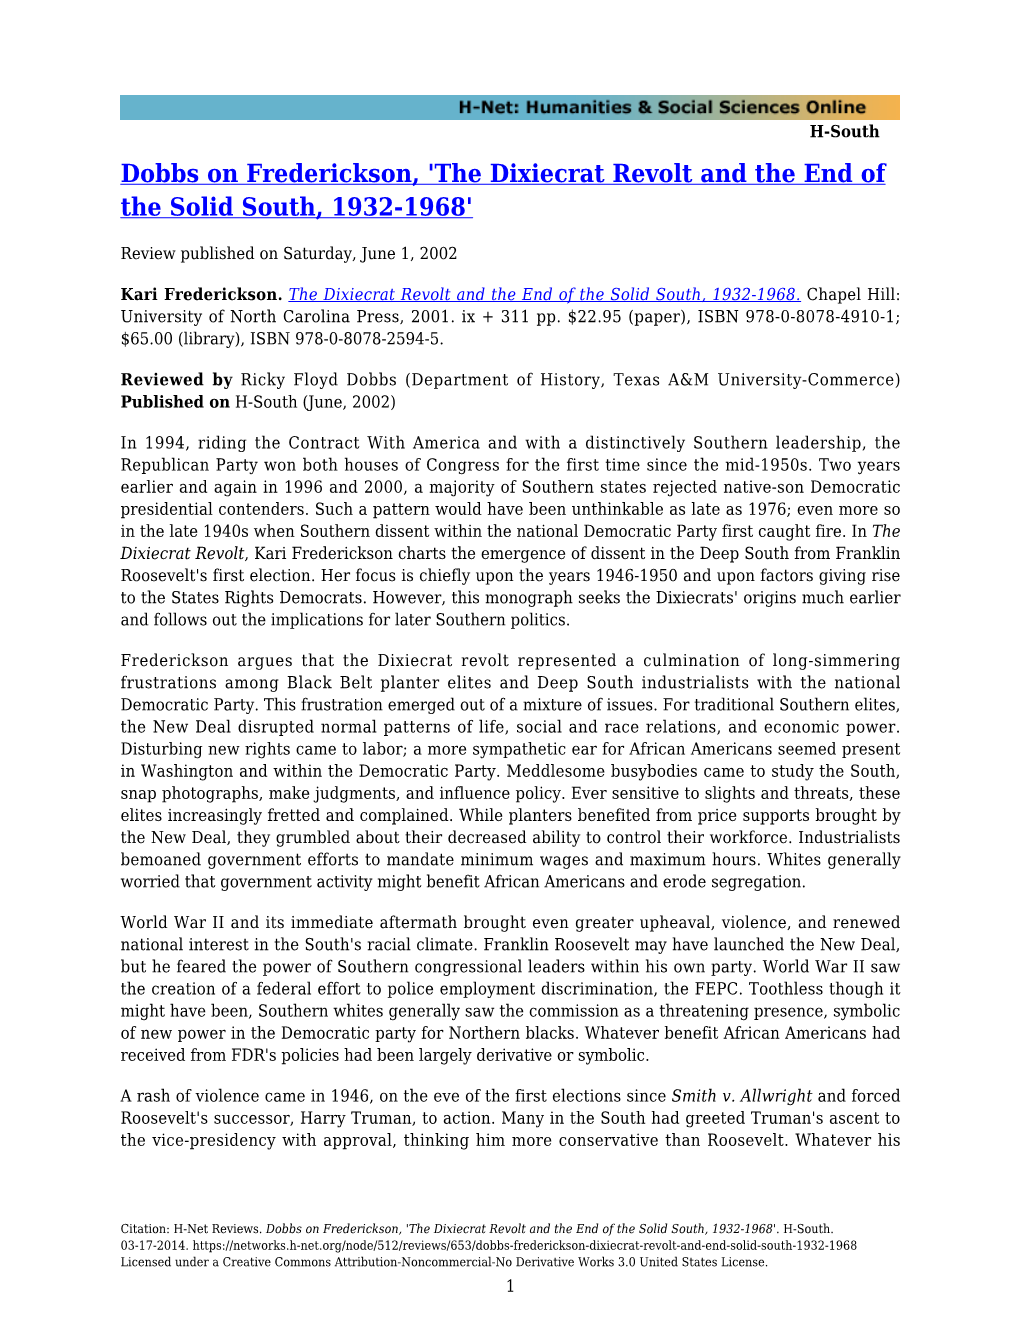 The Dixiecrat Revolt and the End of the Solid South, 1932-1968'